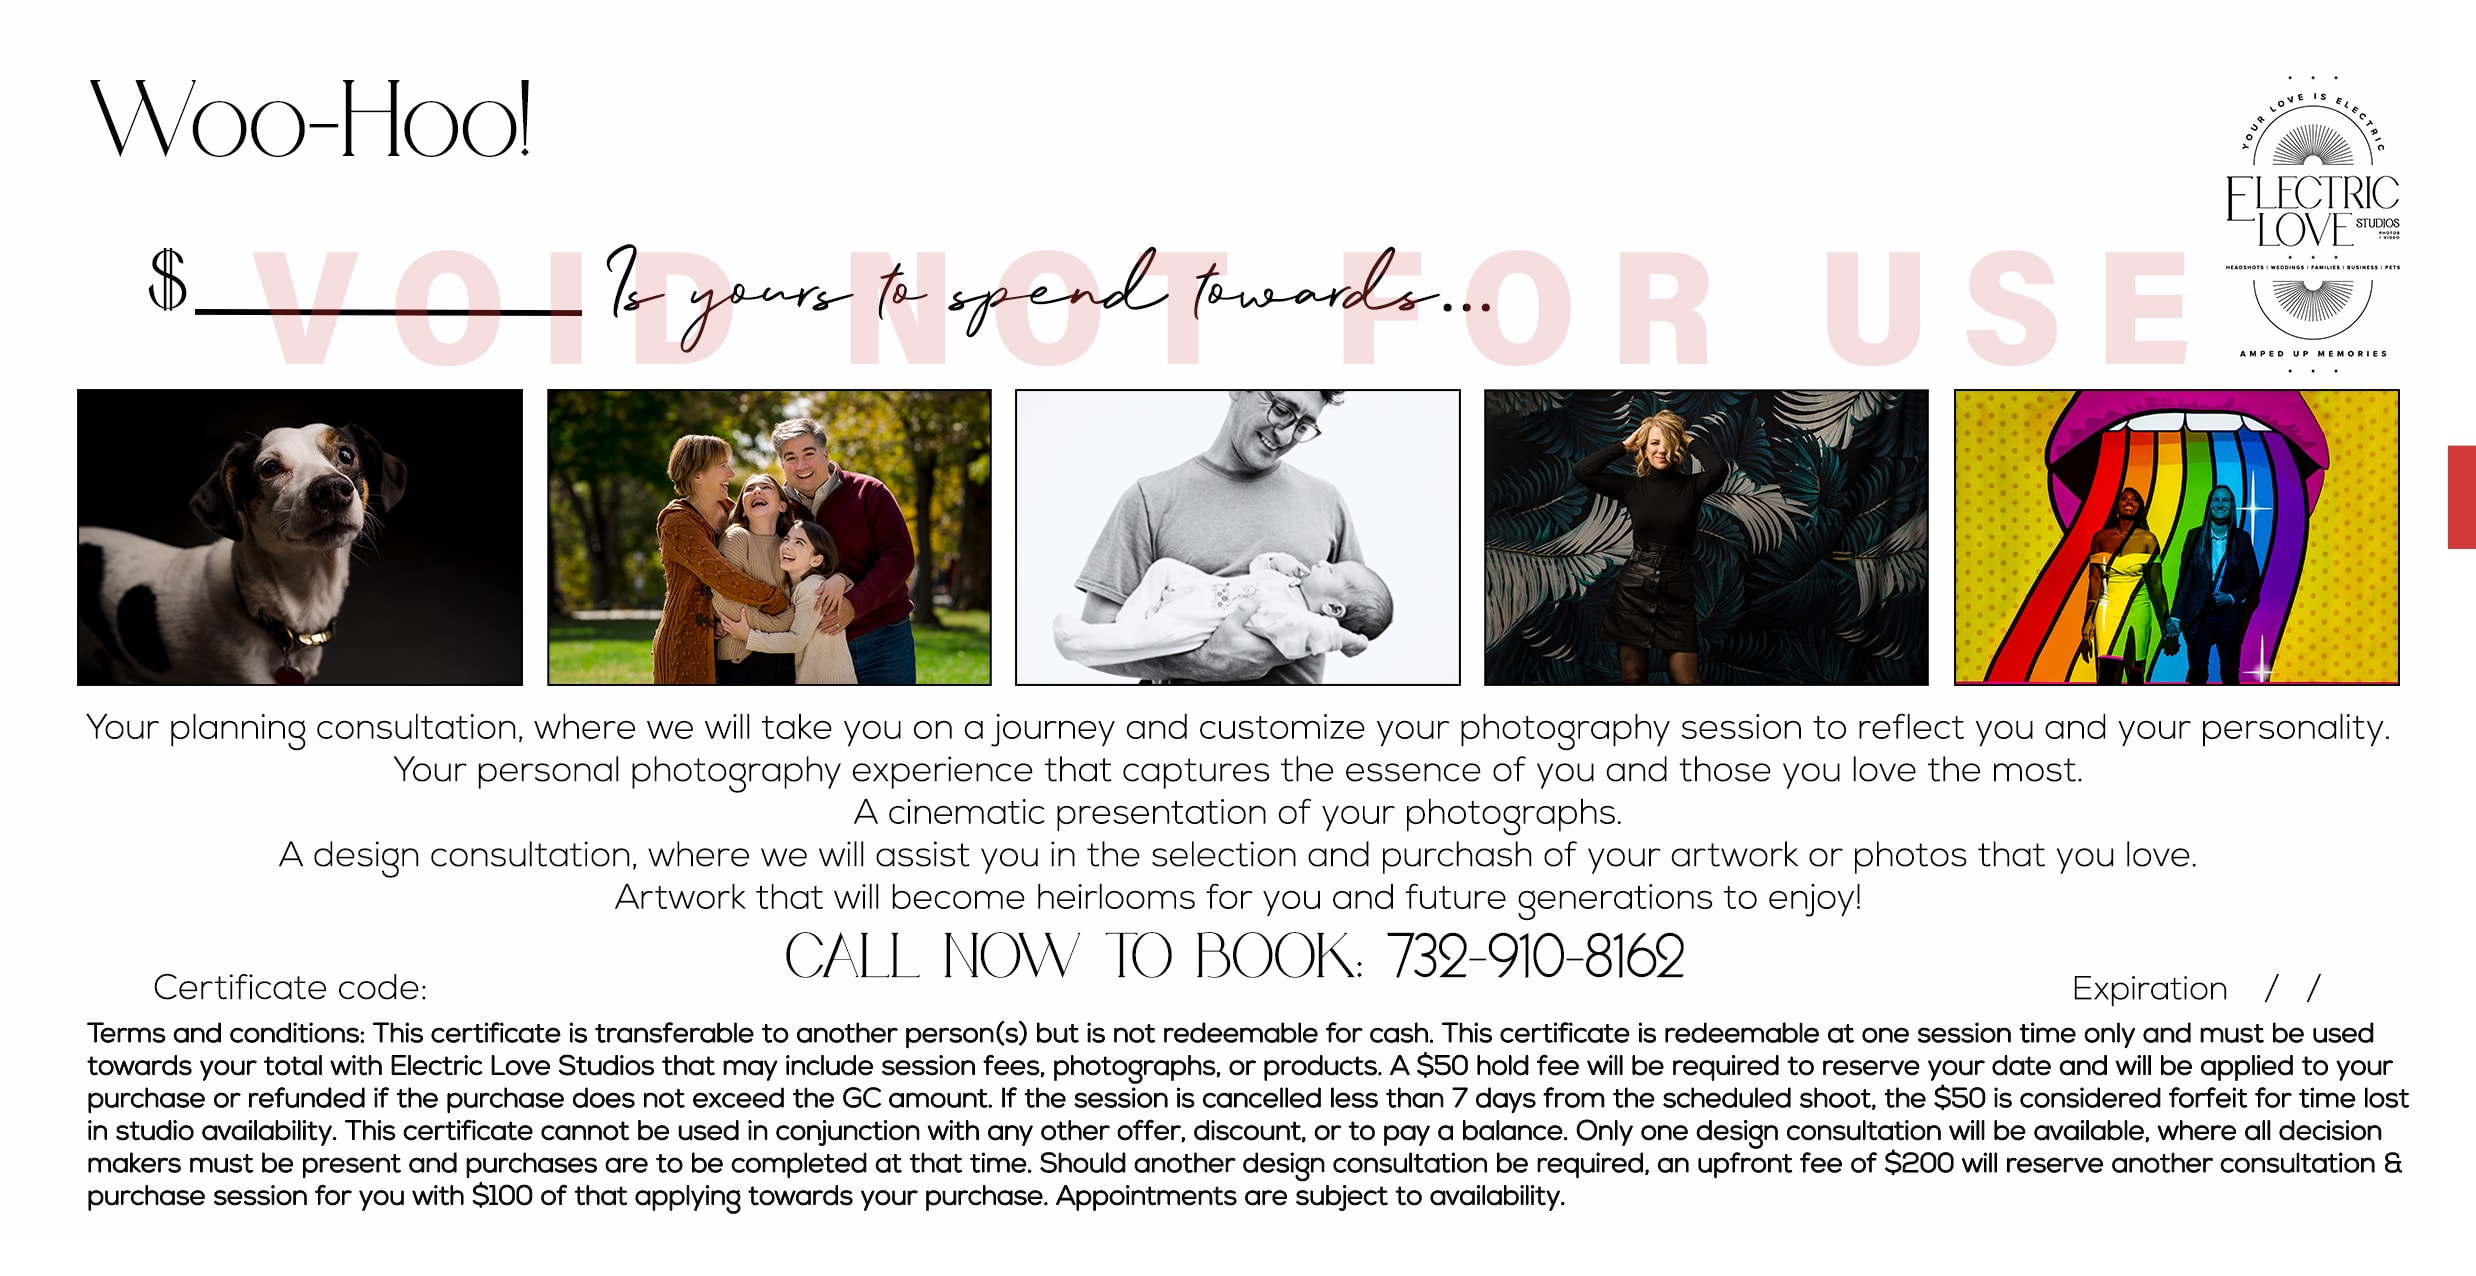 GIft Certificate photo